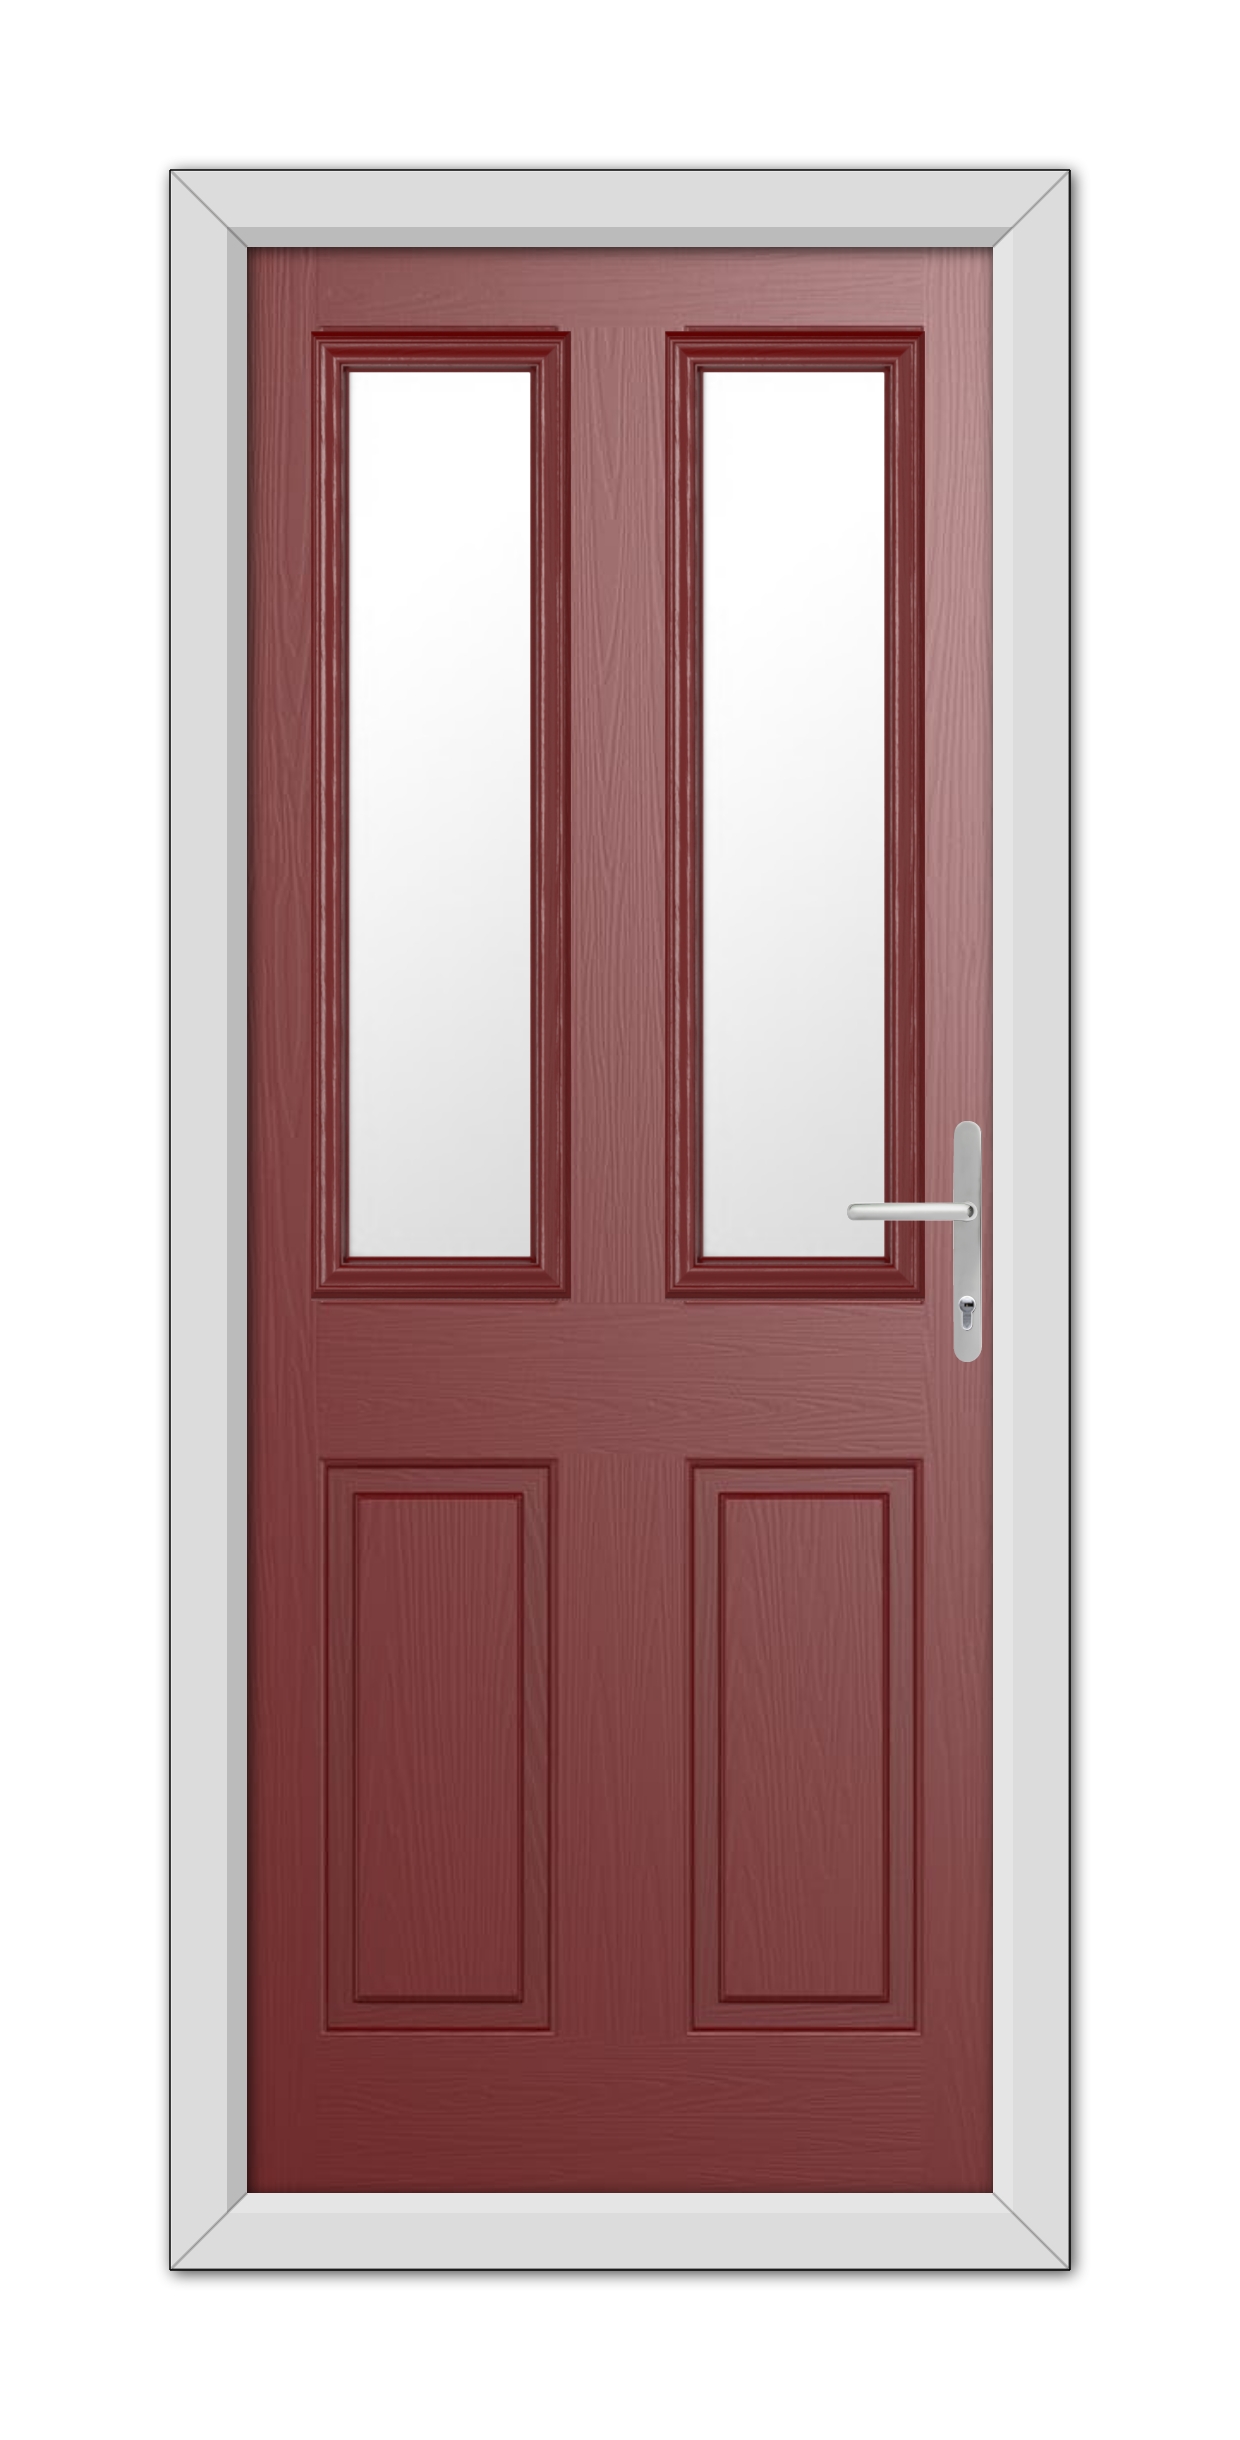 Double Red Whitmore Composite Door with white trim, featuring rectangular glass panels and a modern handle, set in a white frame.